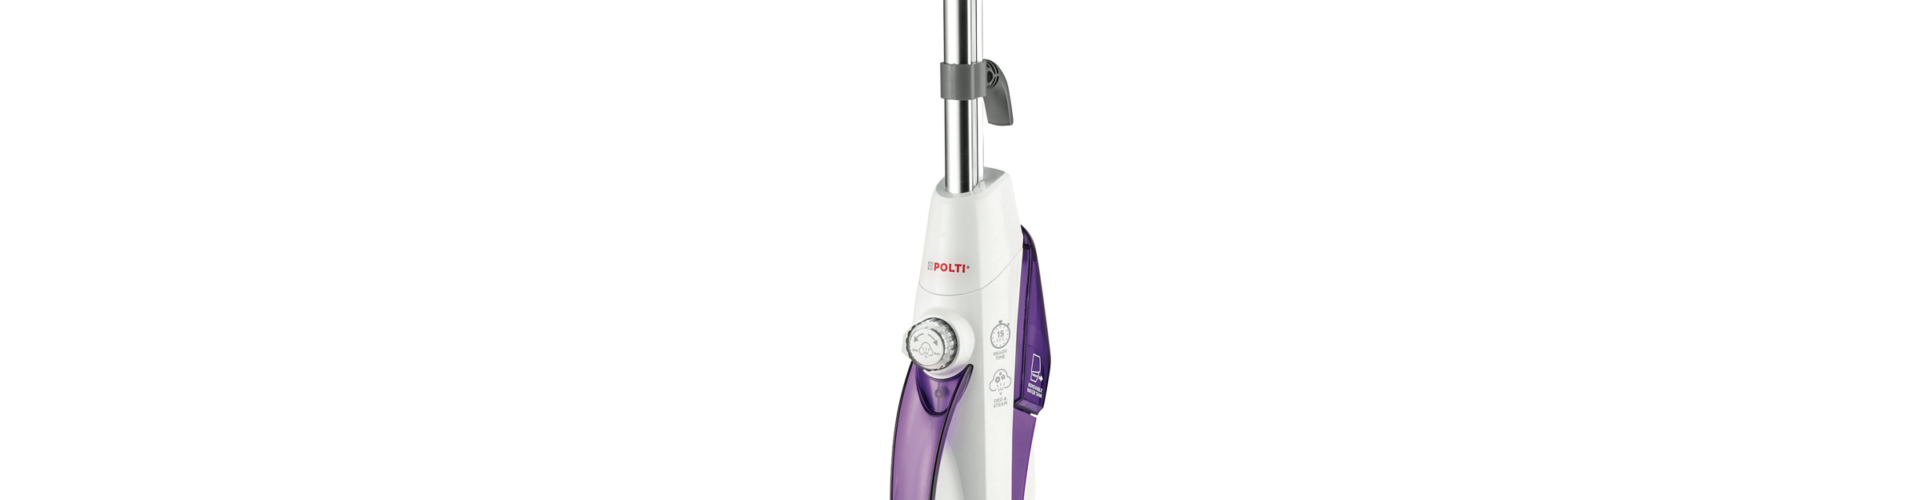 Polti Vaporetto SV440 Double Steam Mop and Handheld Steam Cleaner